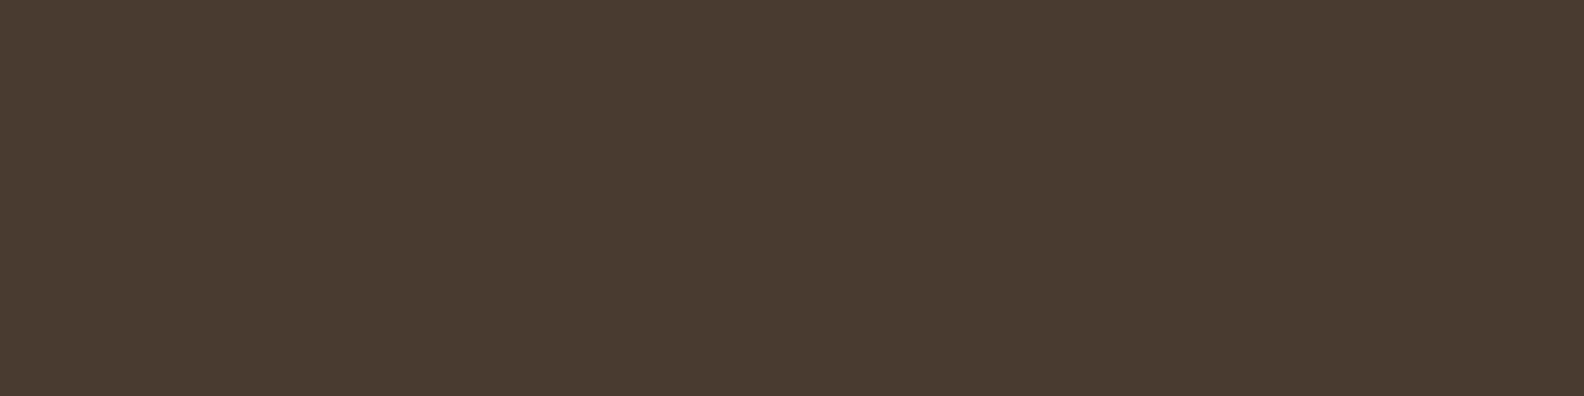 1584x396 Taupe Solid Color Background